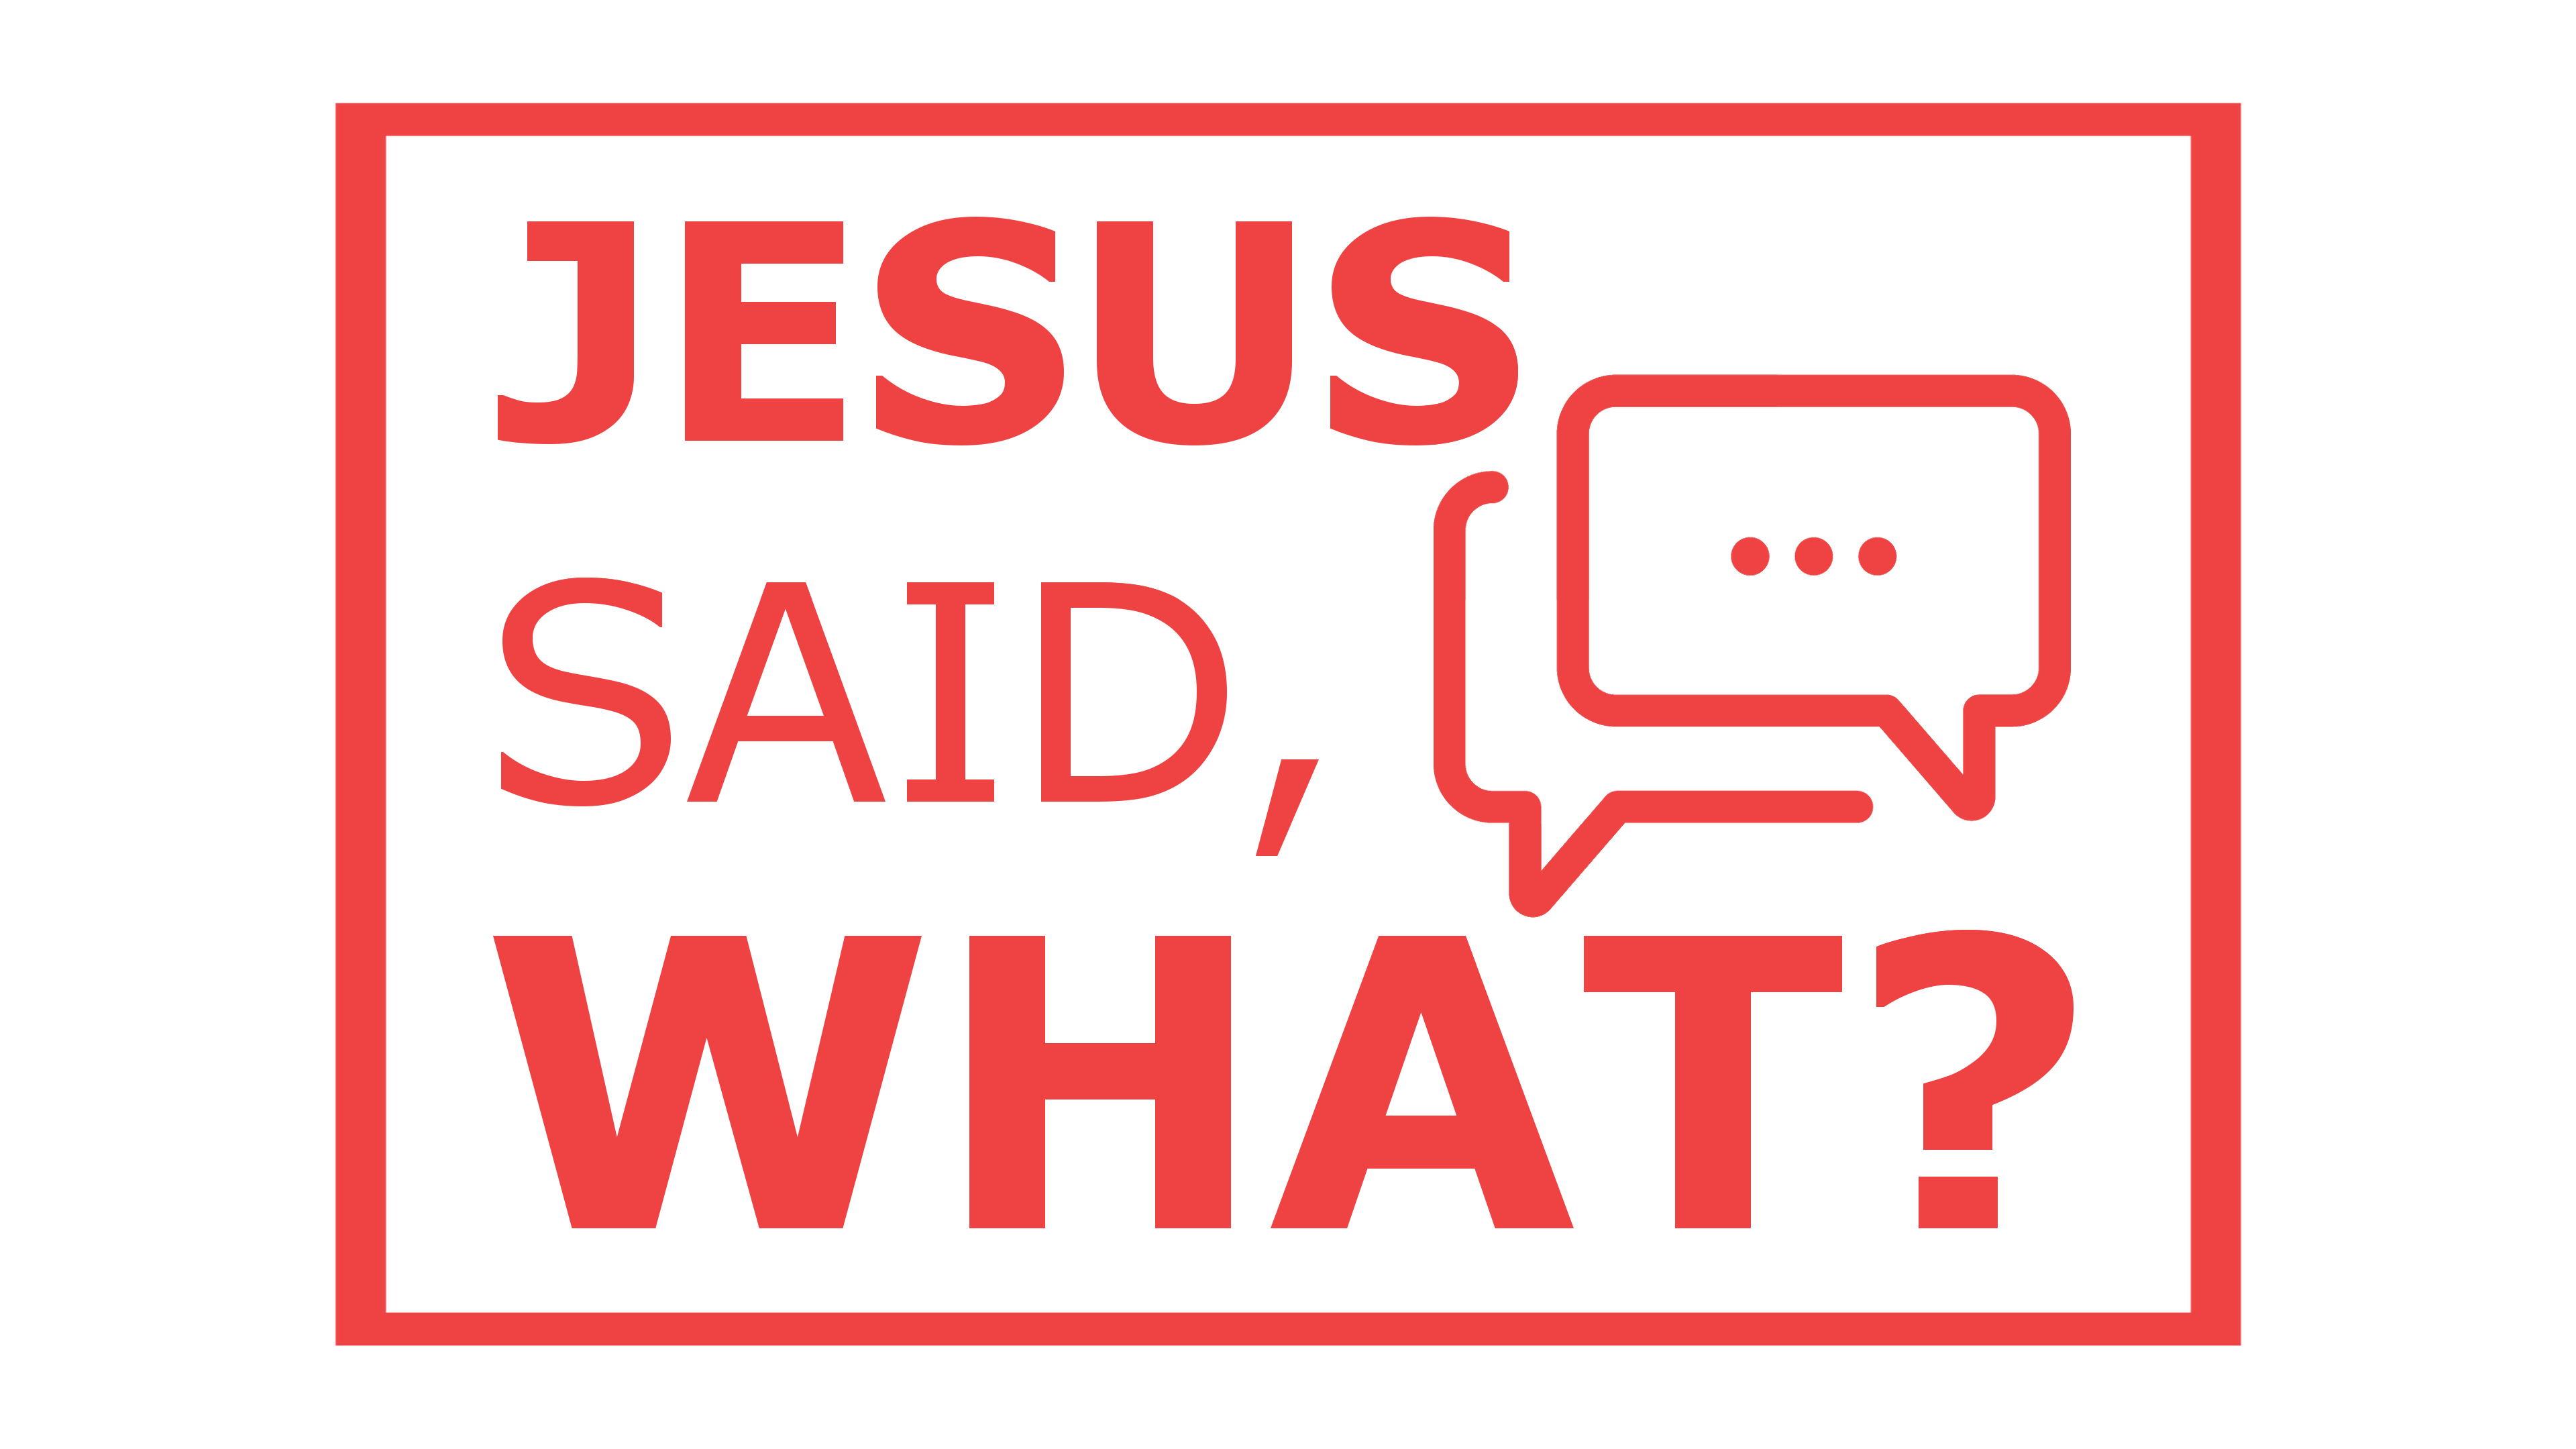 JESUS said, WHAT? | About Worrying